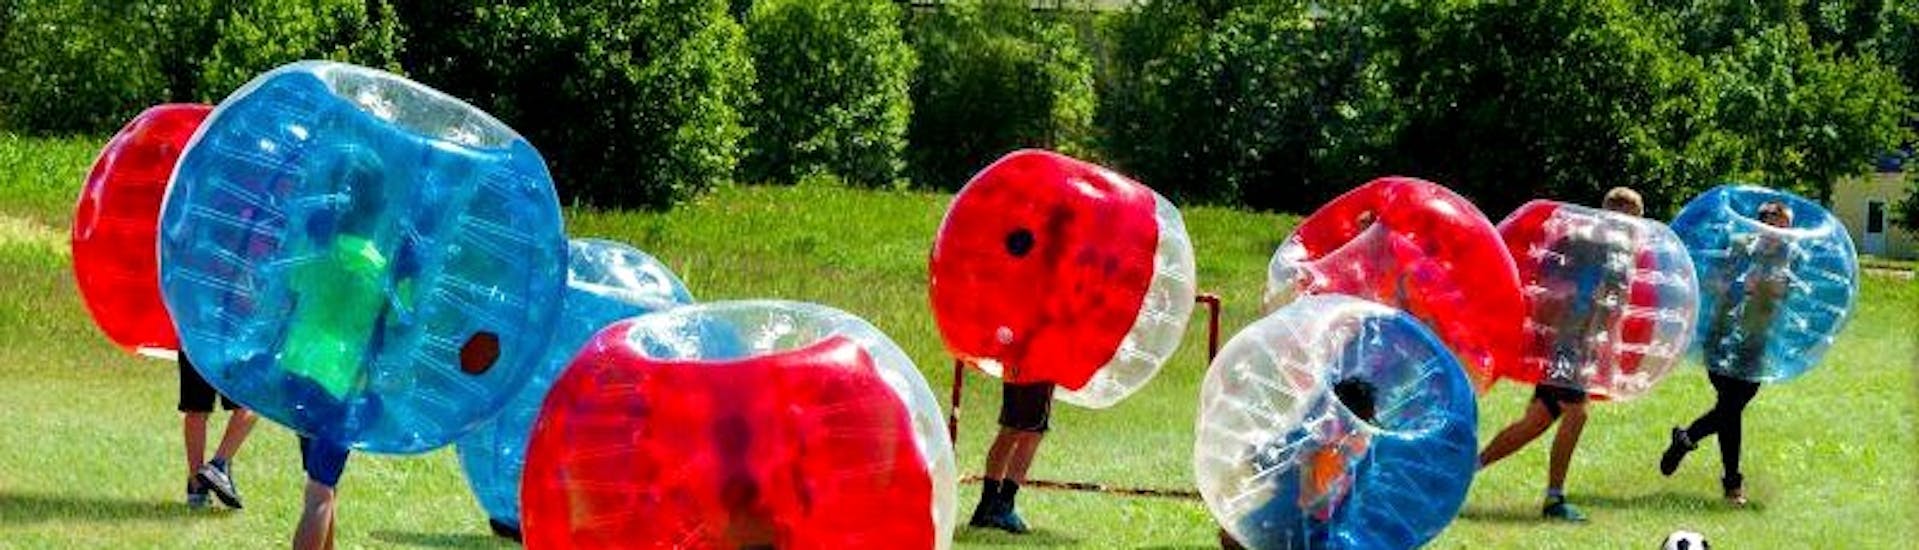 Group playing bubble football during the bachelor party arrow tag + bubble football hosted by Outdoor Center Baumgarten.